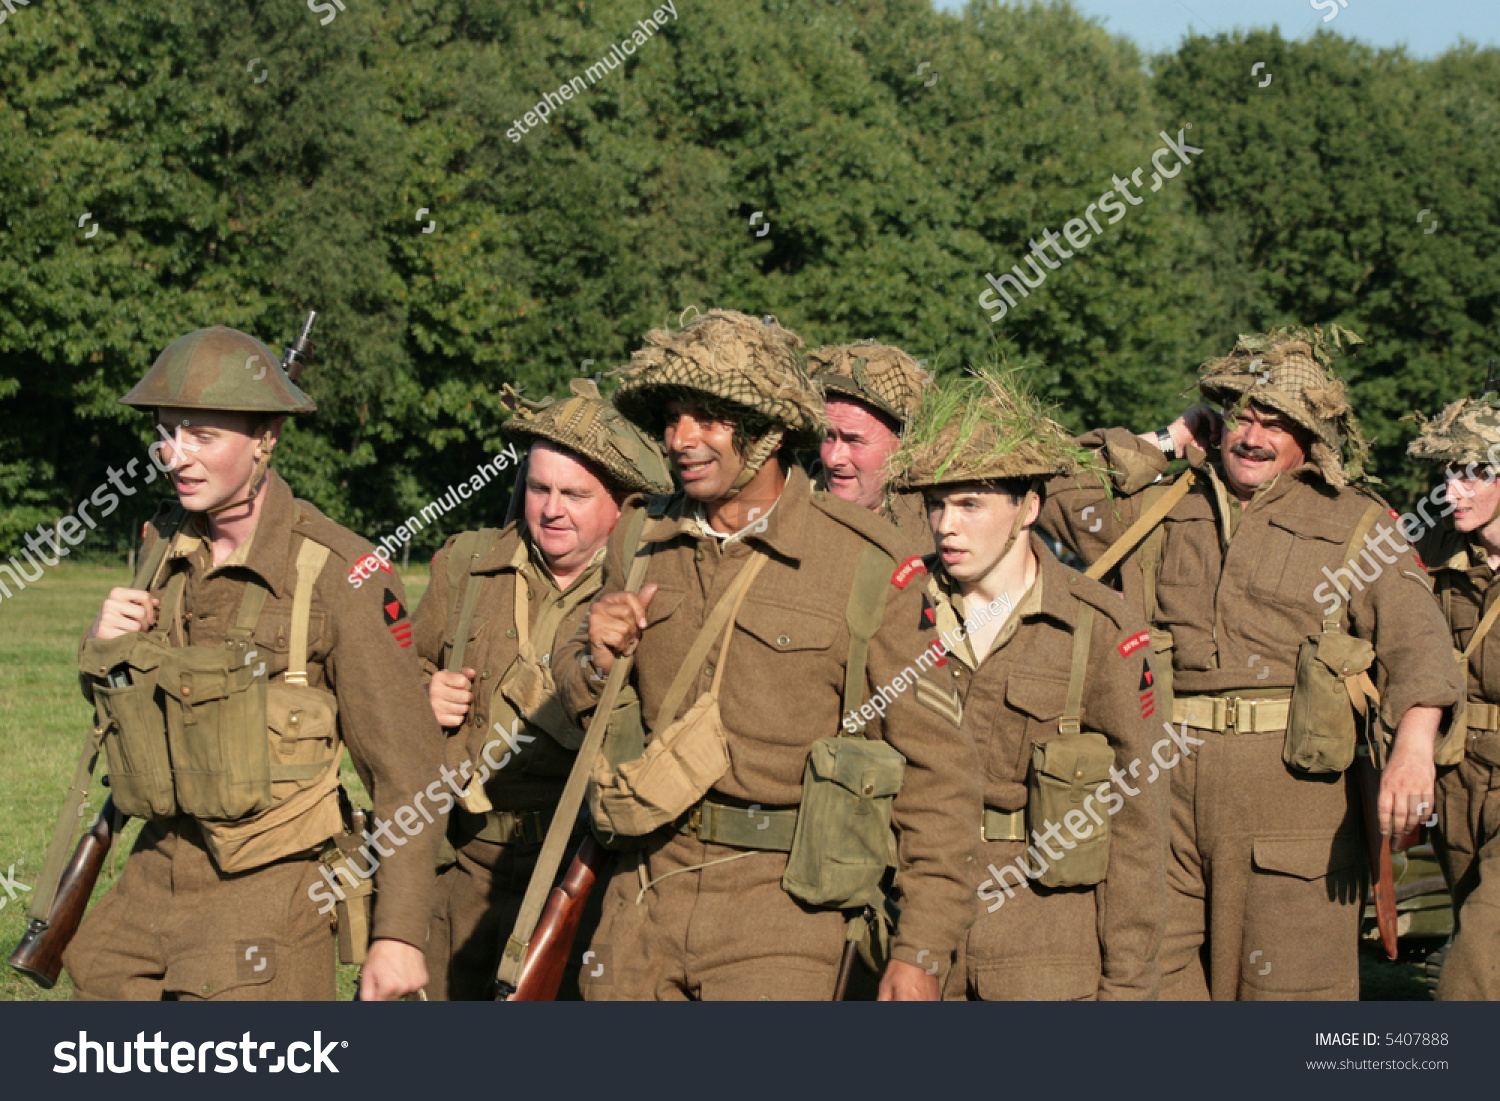 Ww1 Soldiers Marching Taken Military Show Stock Photo 5407888 ...